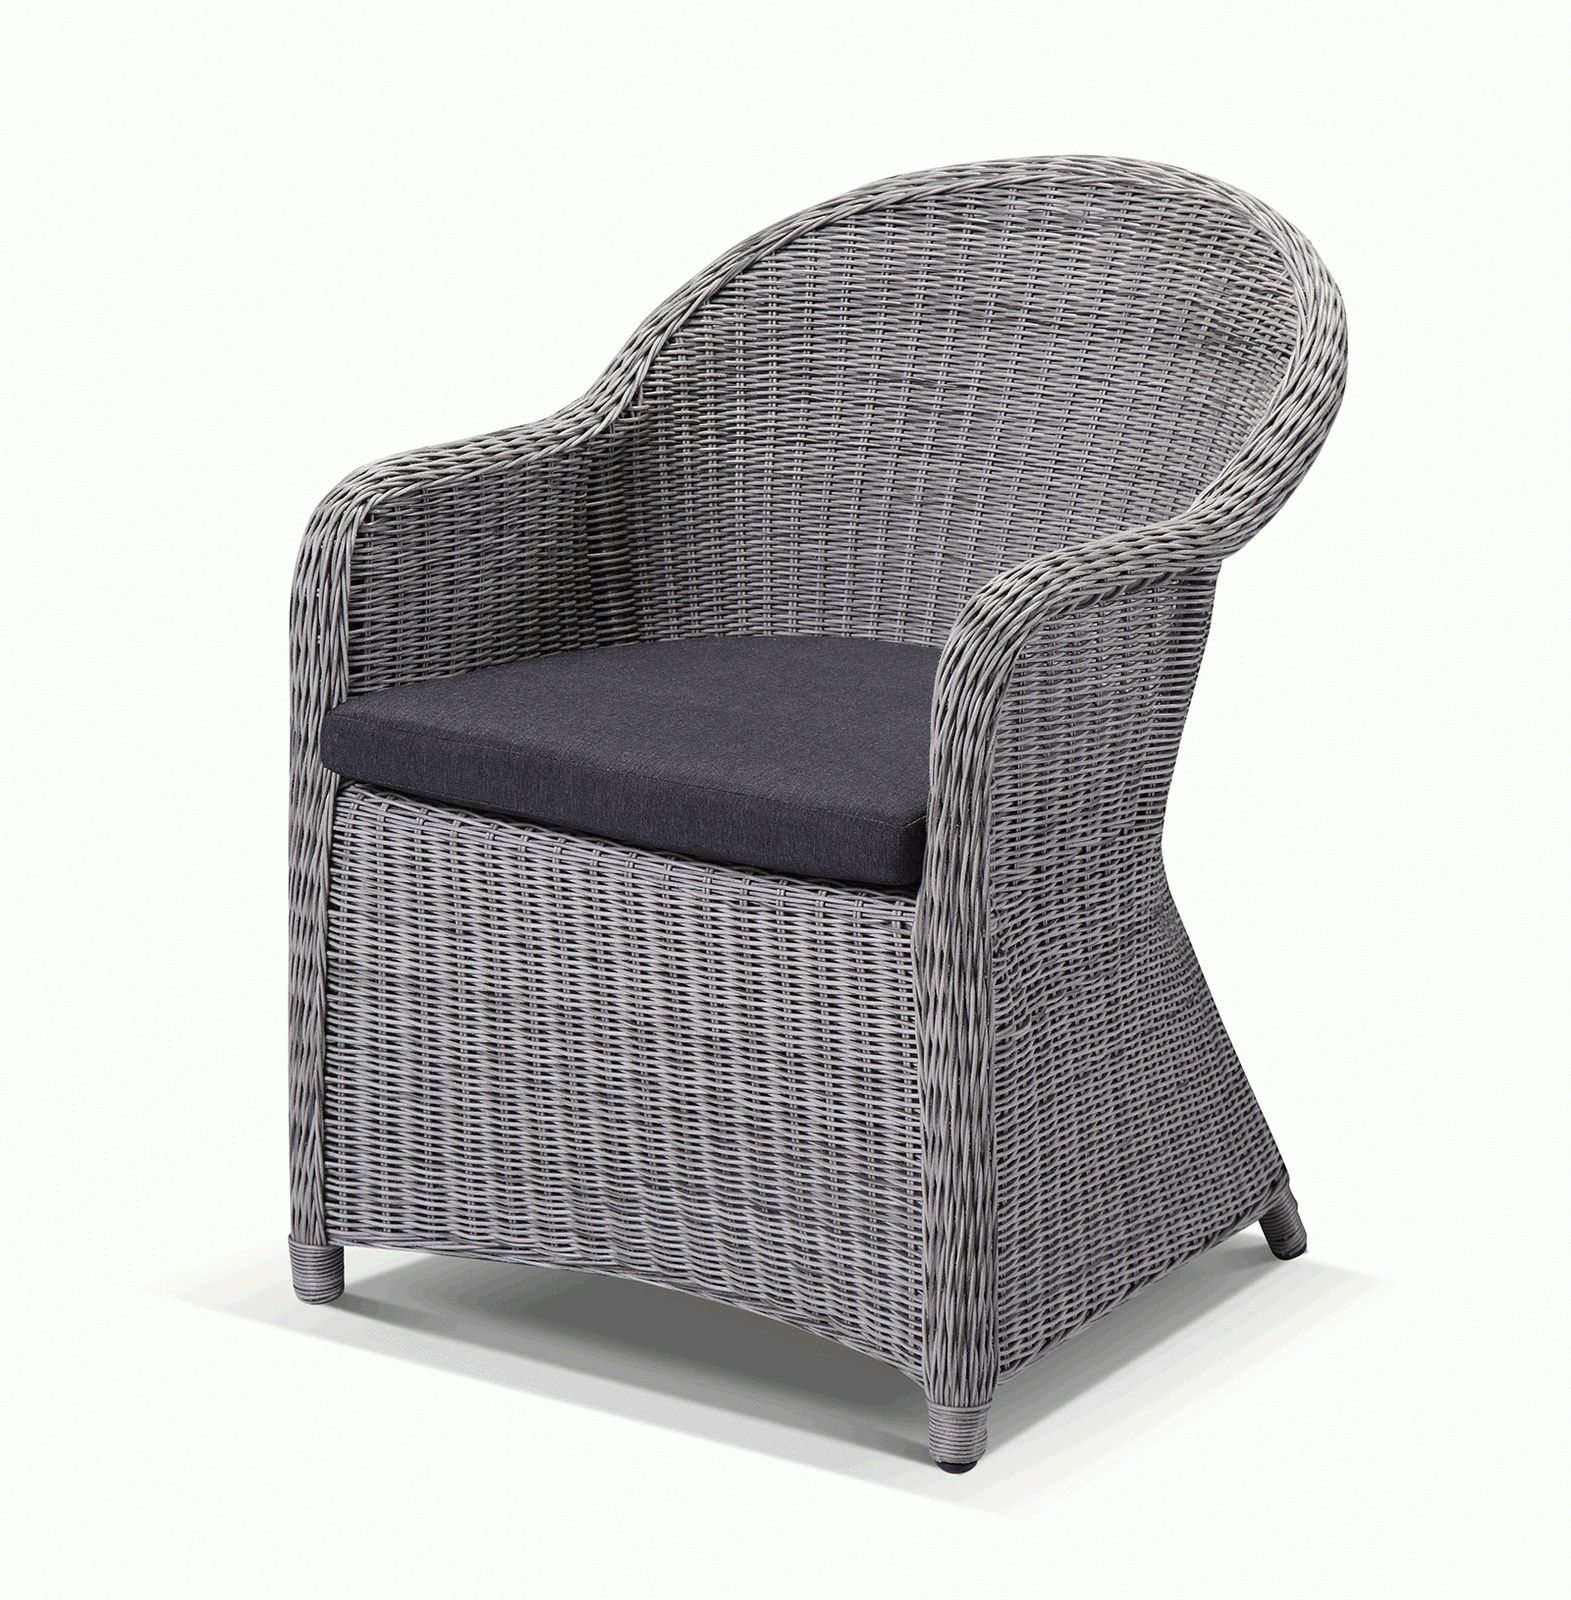 New Grey Outdoor Wicker Rattan Cane Dining Arm Chair Patio Cane Rattan For Favorite Rattan Wicker Outdoor Seating Sets (View 15 of 15)